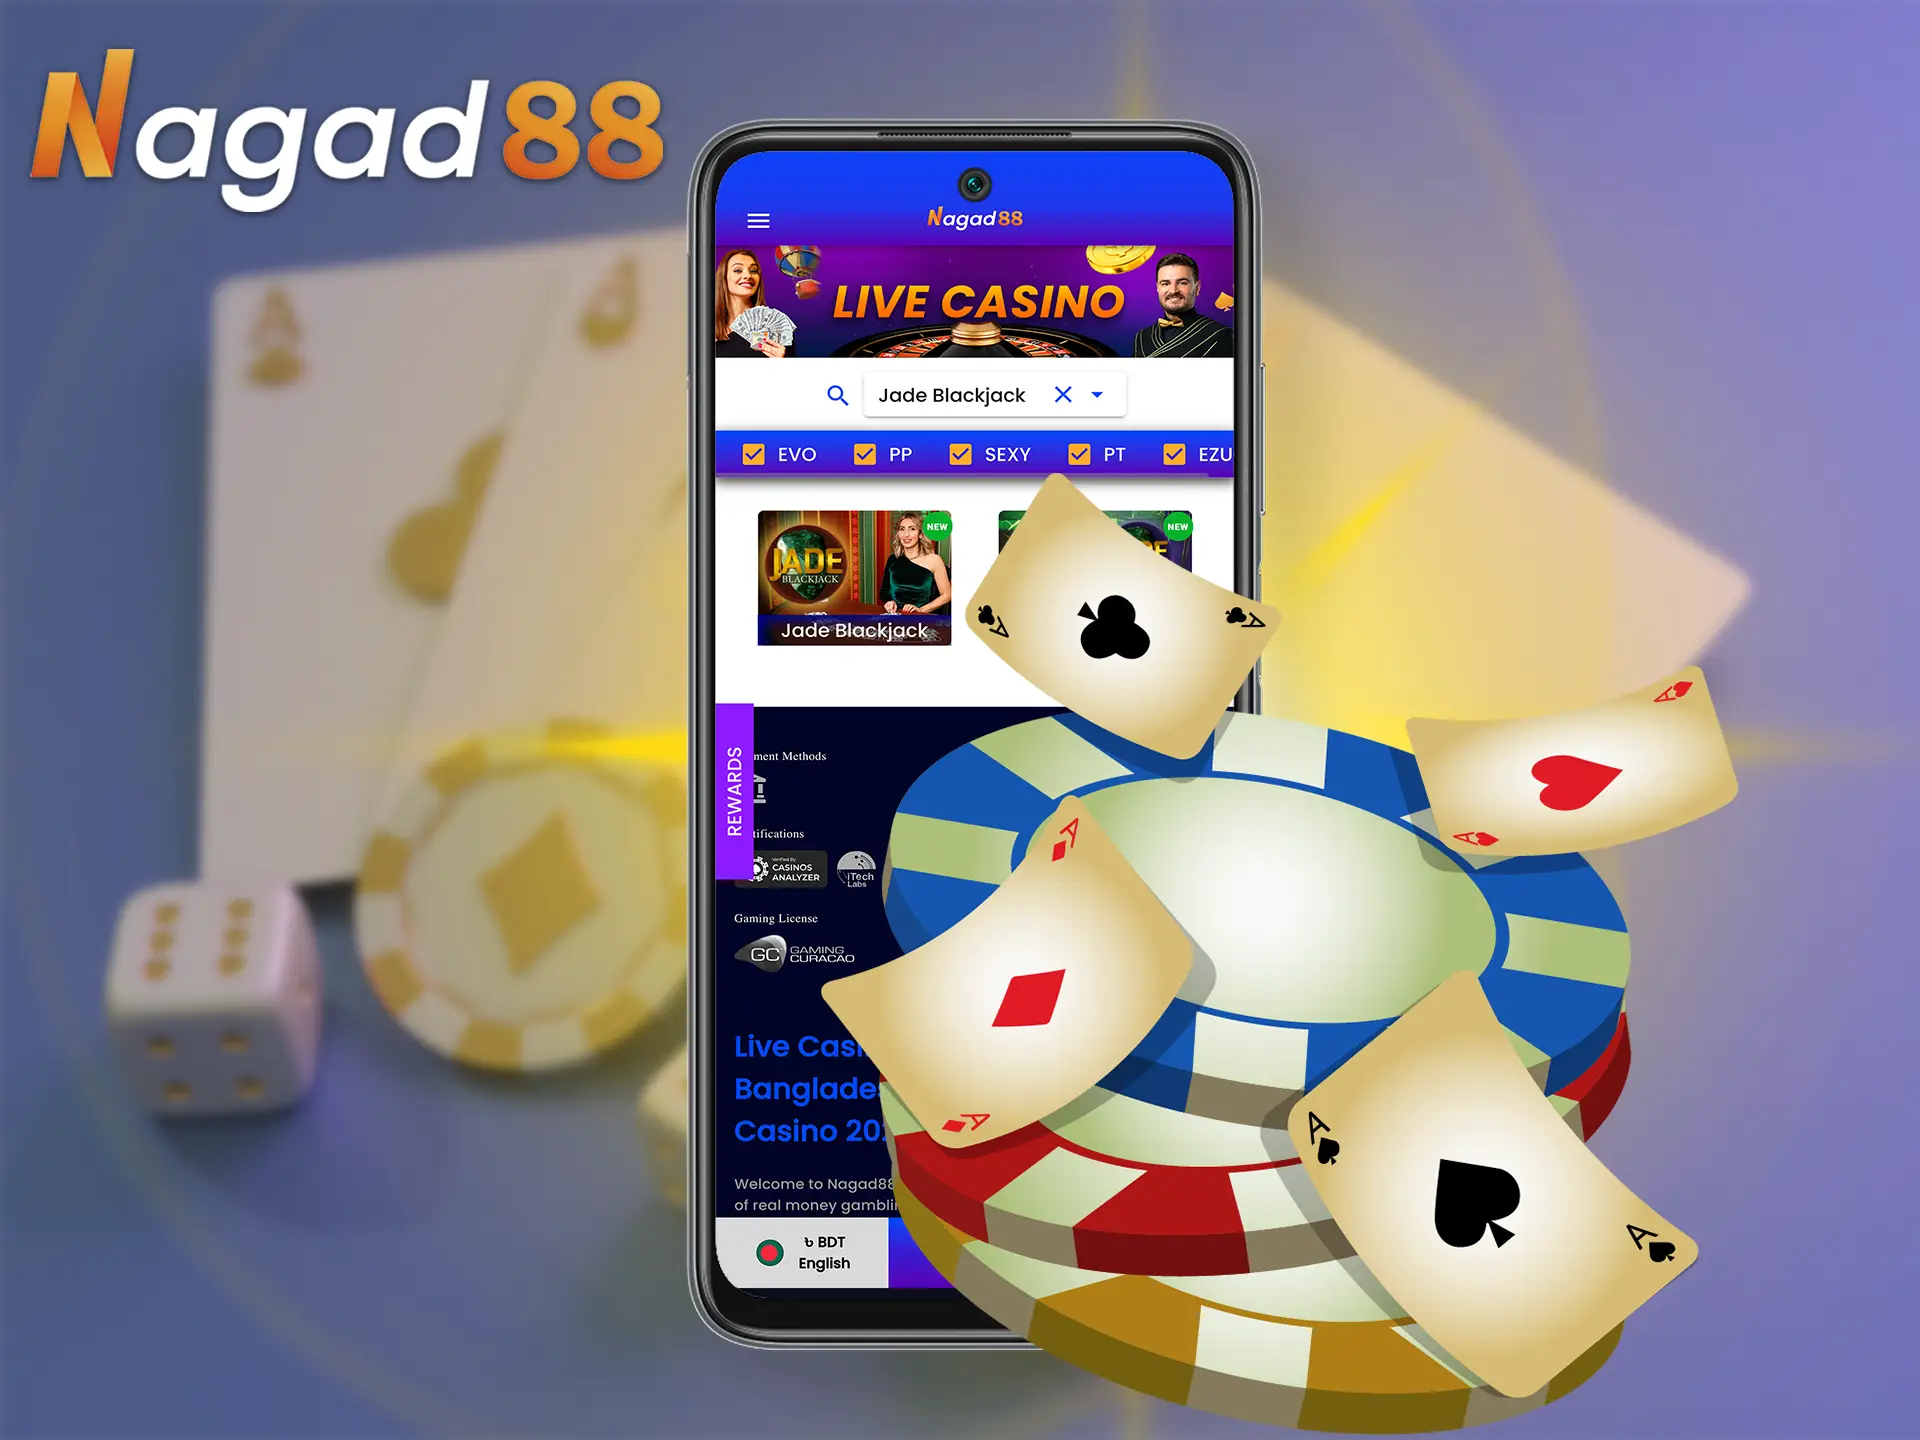 A giant jackpot awaits Nagad88 players, as well as many other interesting prizes.